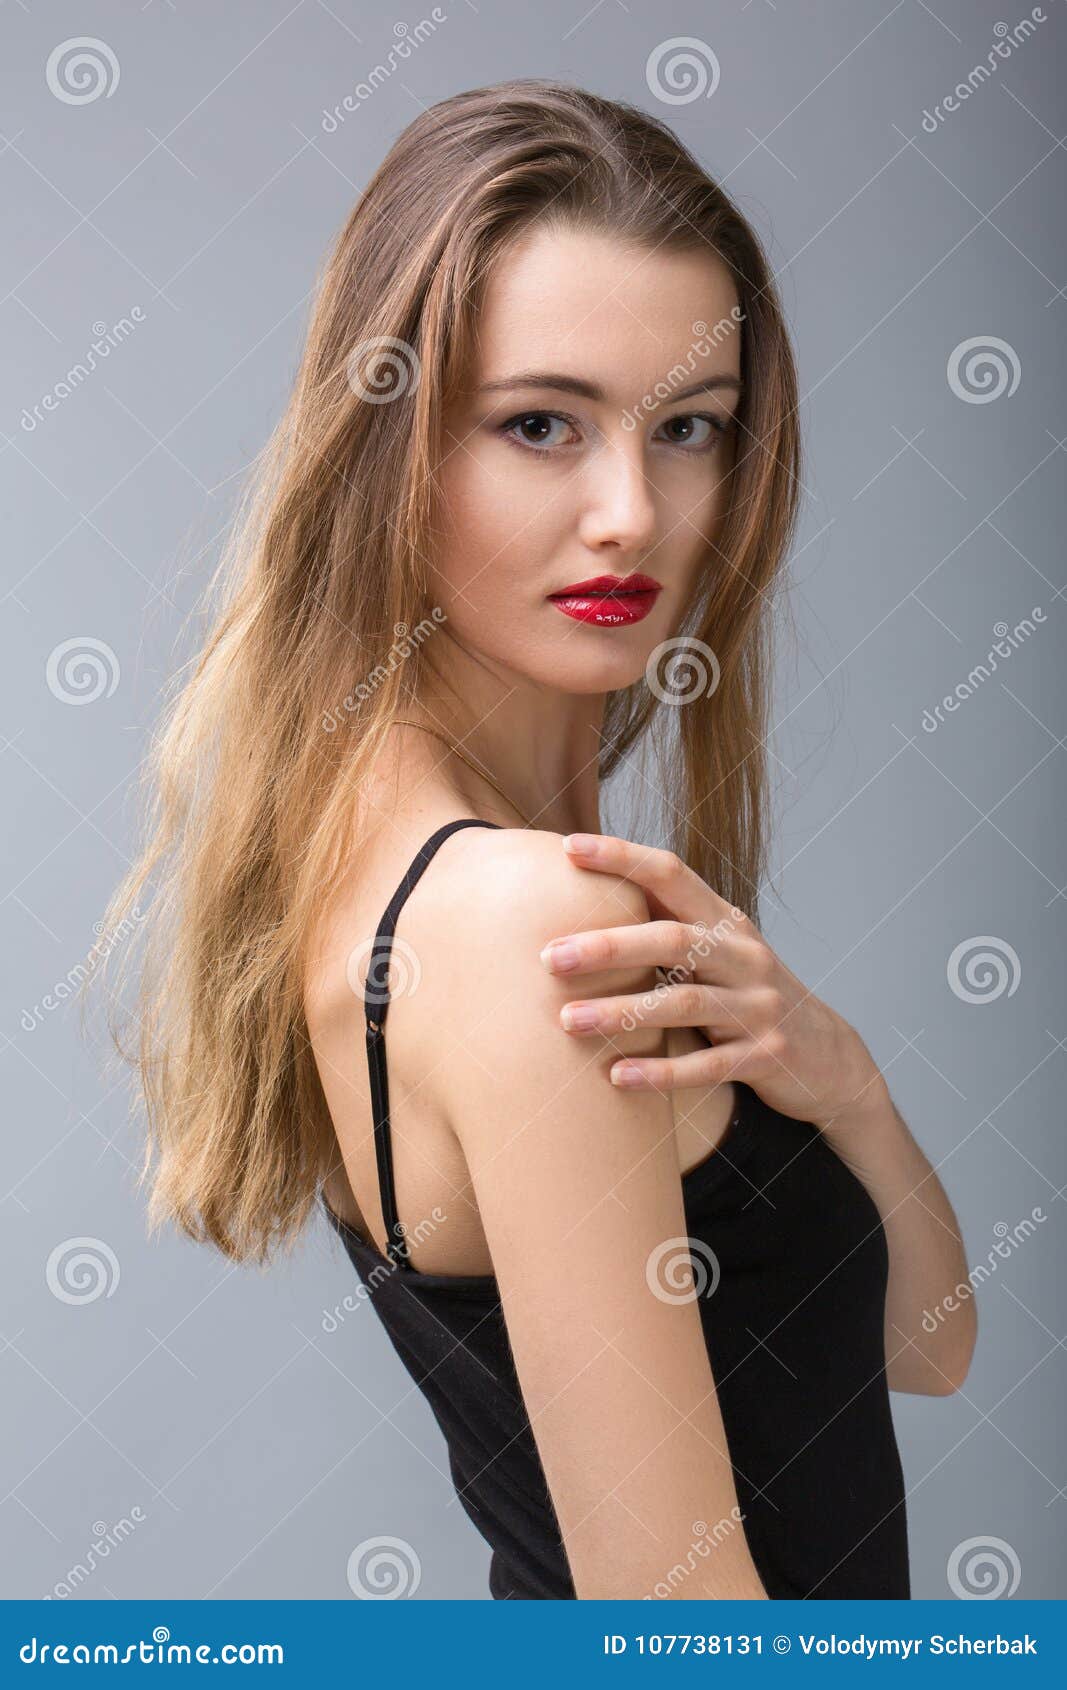 Beautiful Blonde Turning Away, Looking Over Her Shoulder Stock Image ...